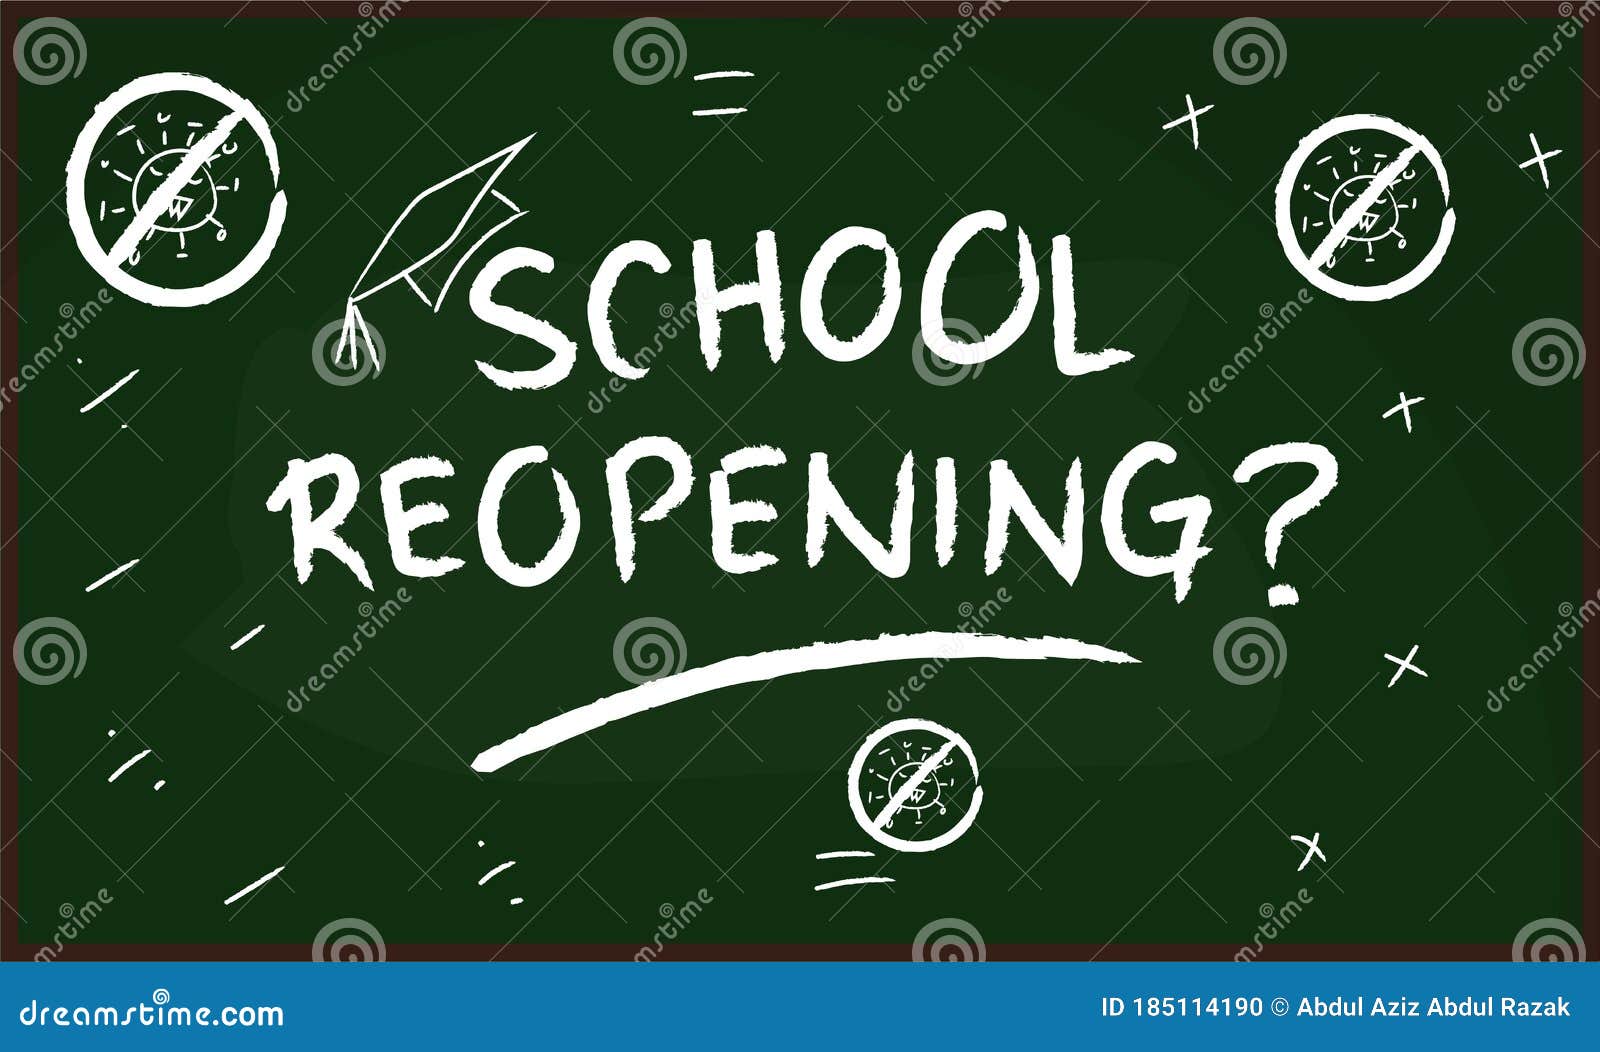   : covid 19 pandemic of schools reopening conceptual with chalkboard